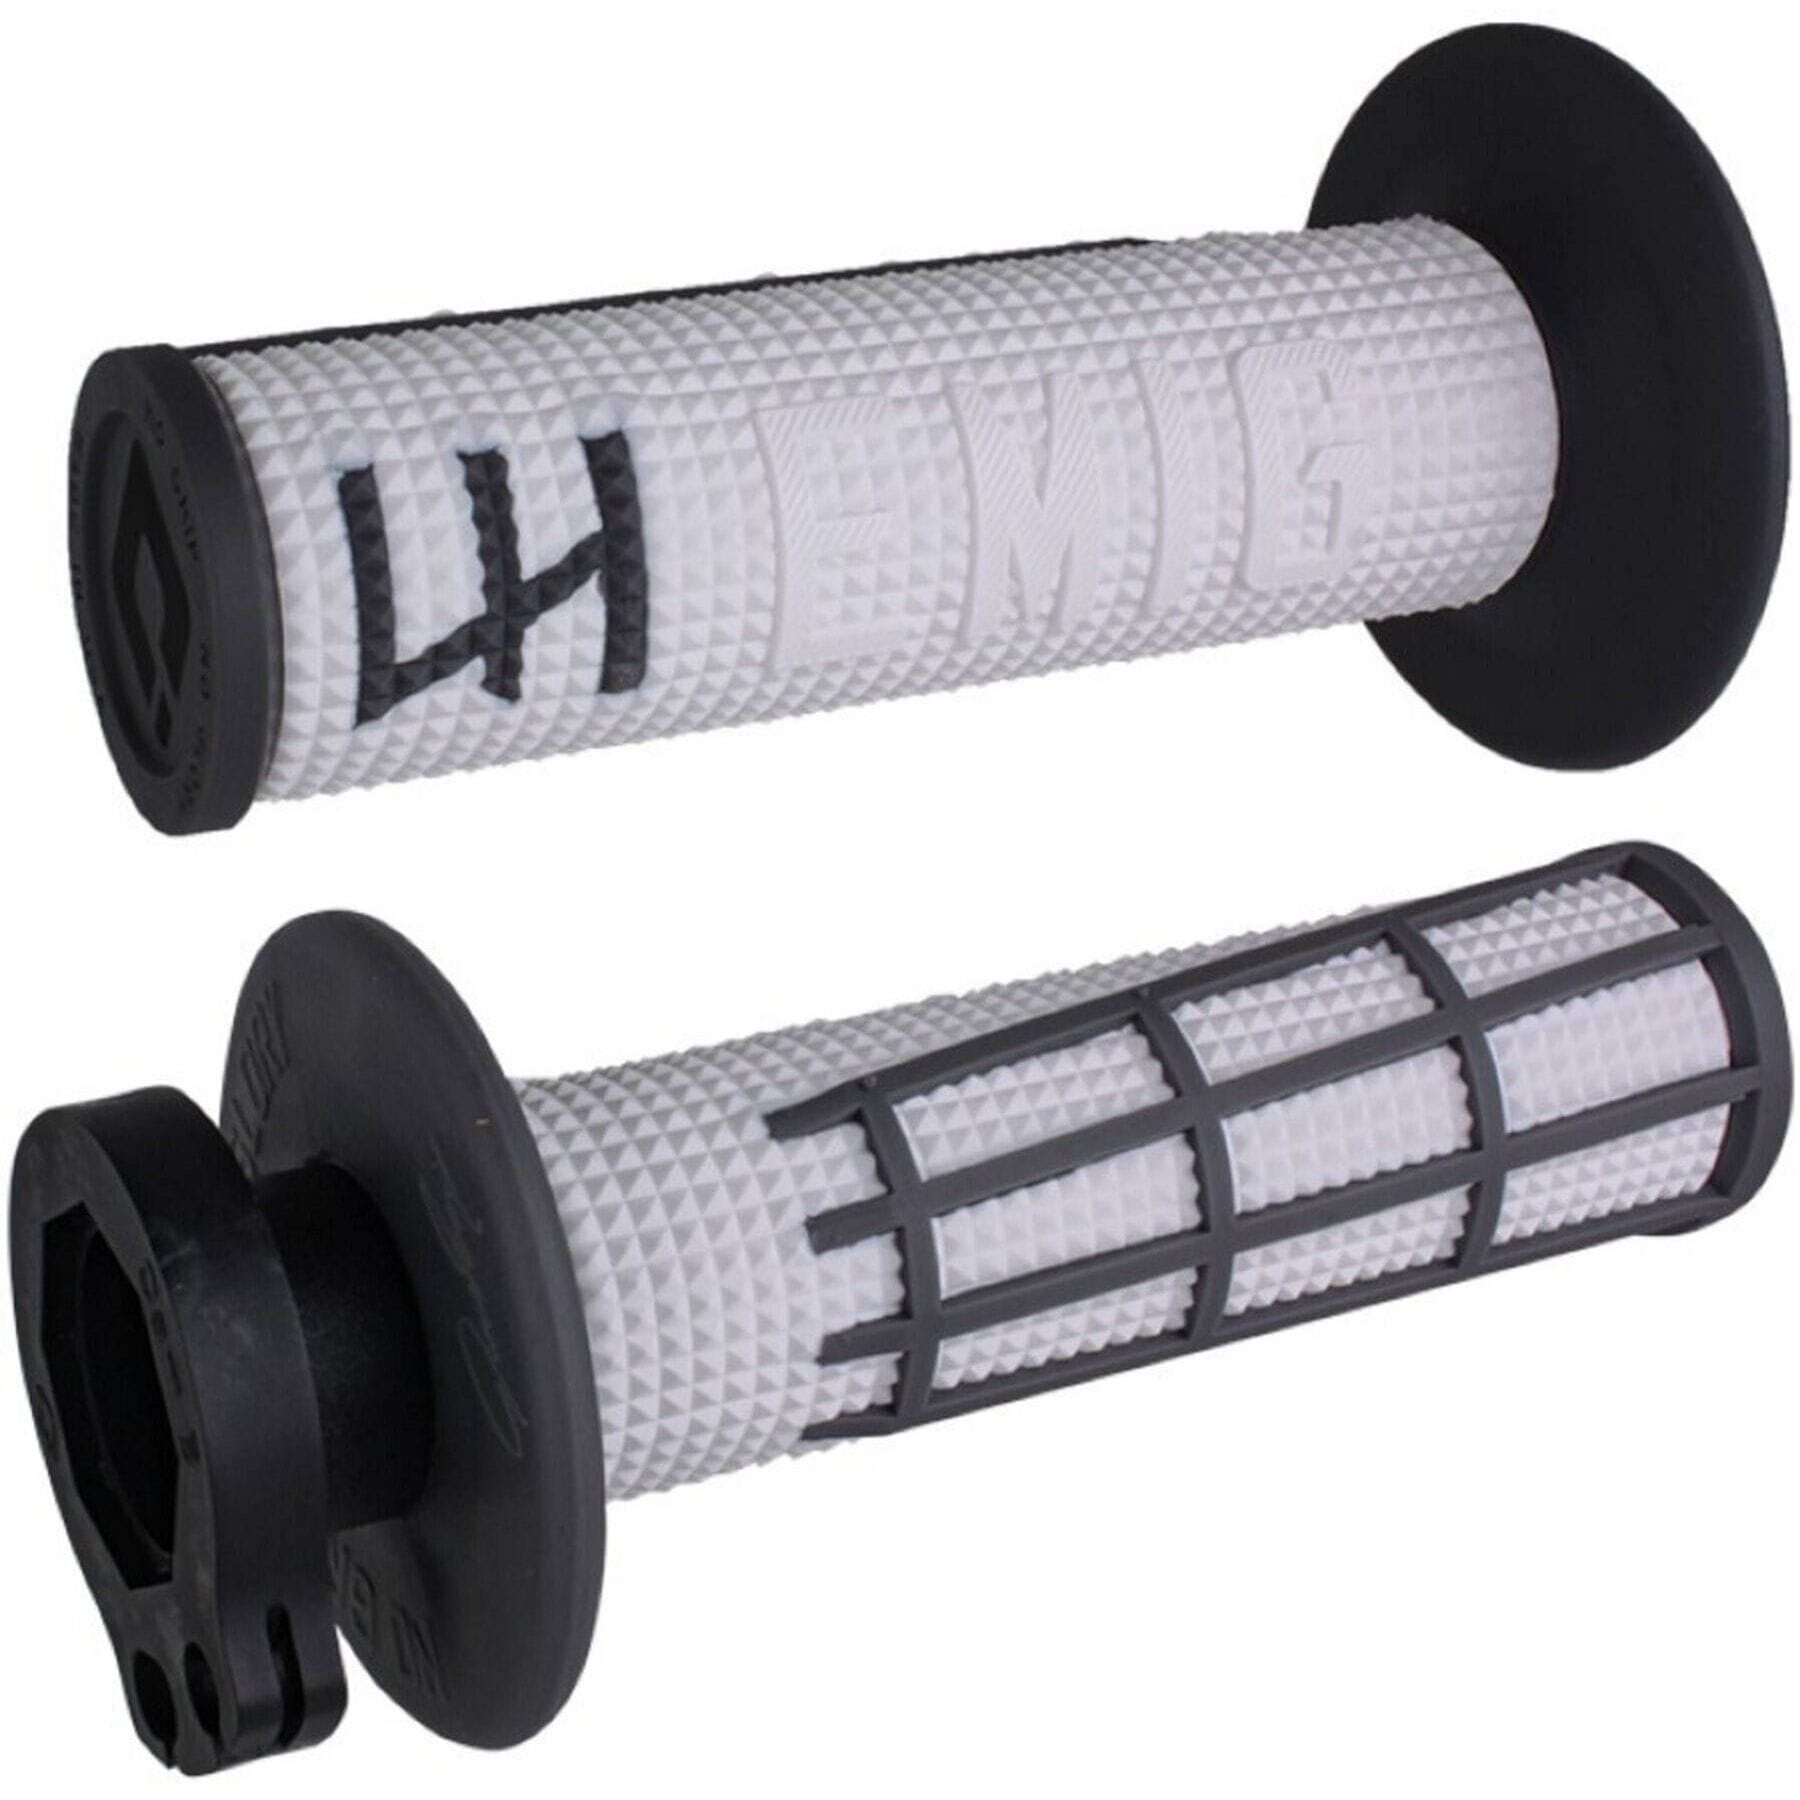 EMIG 2.0 Lock On Grip in White and Graphite color combination